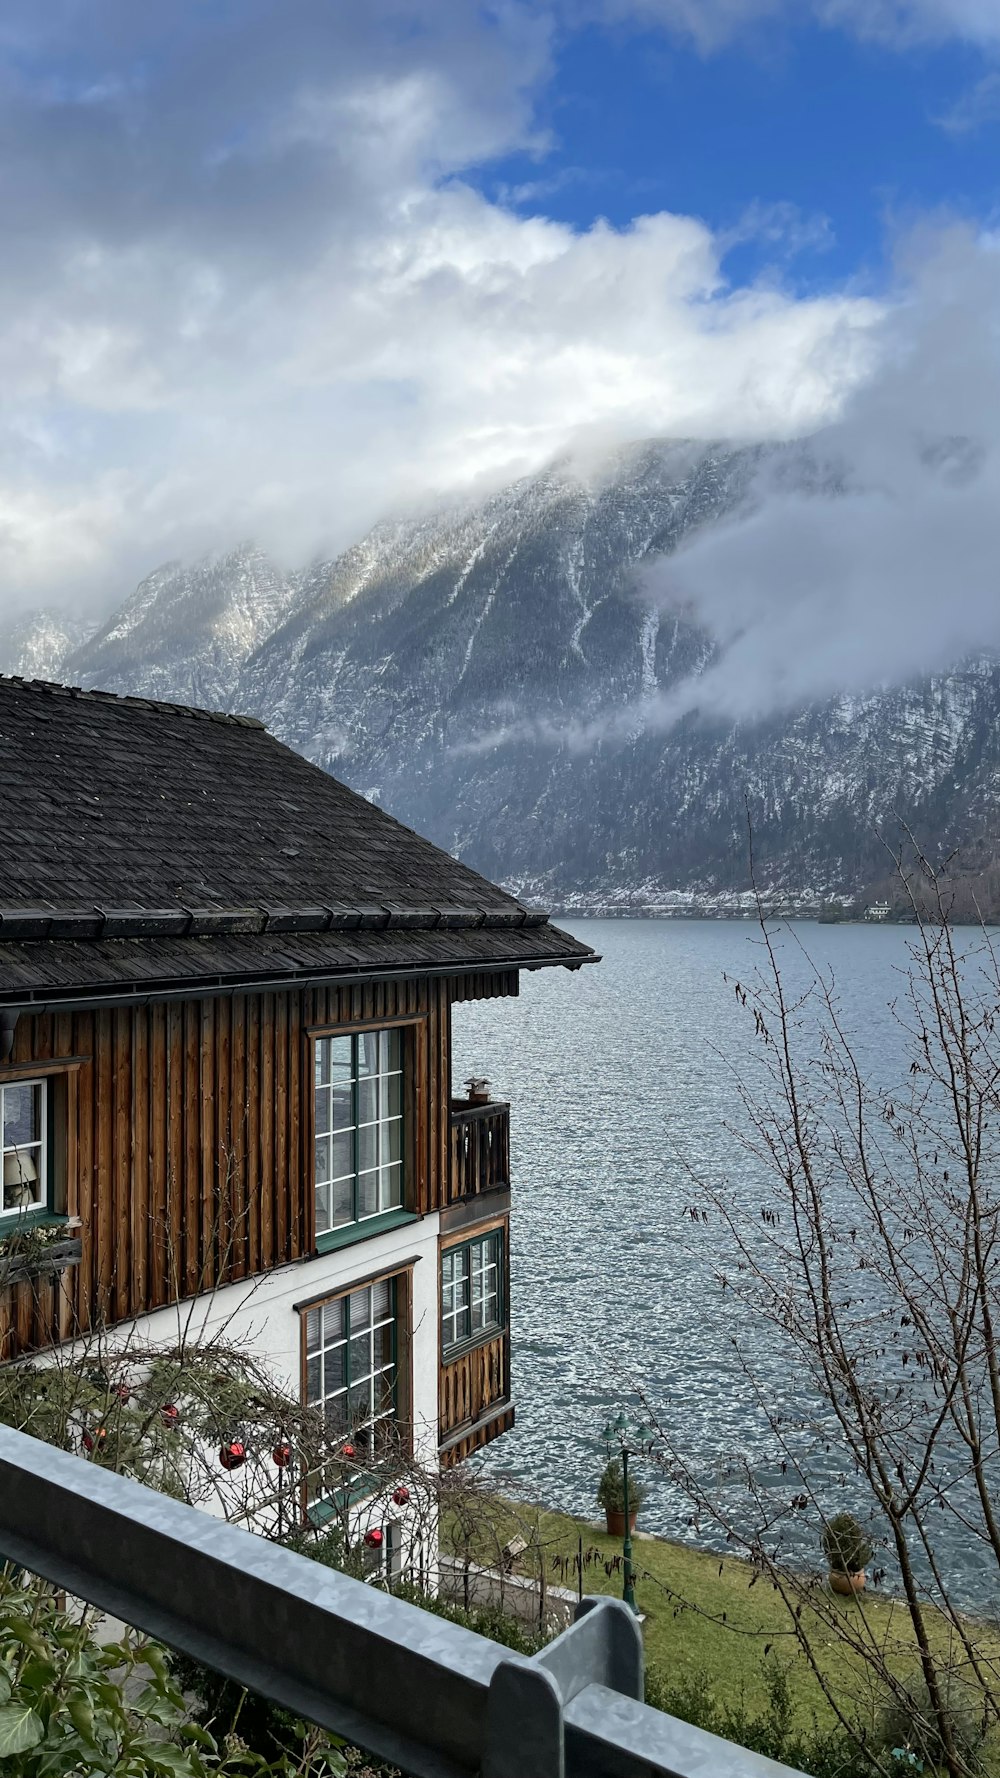 a house next to a body of water with mountains in the background